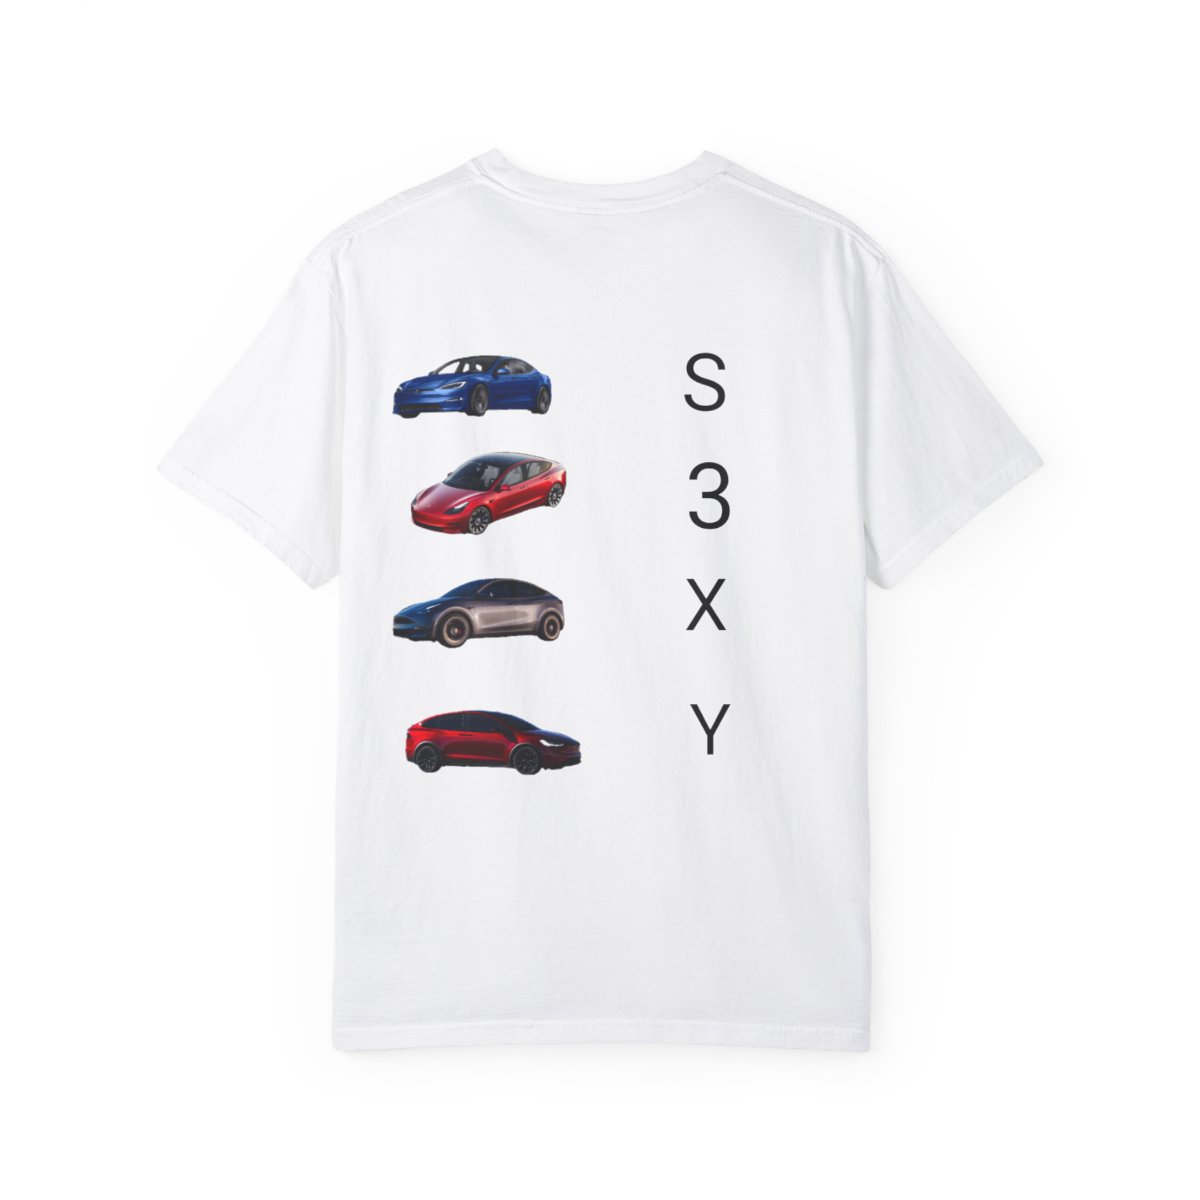 The S.3.X.Y T-Shirt  product main image